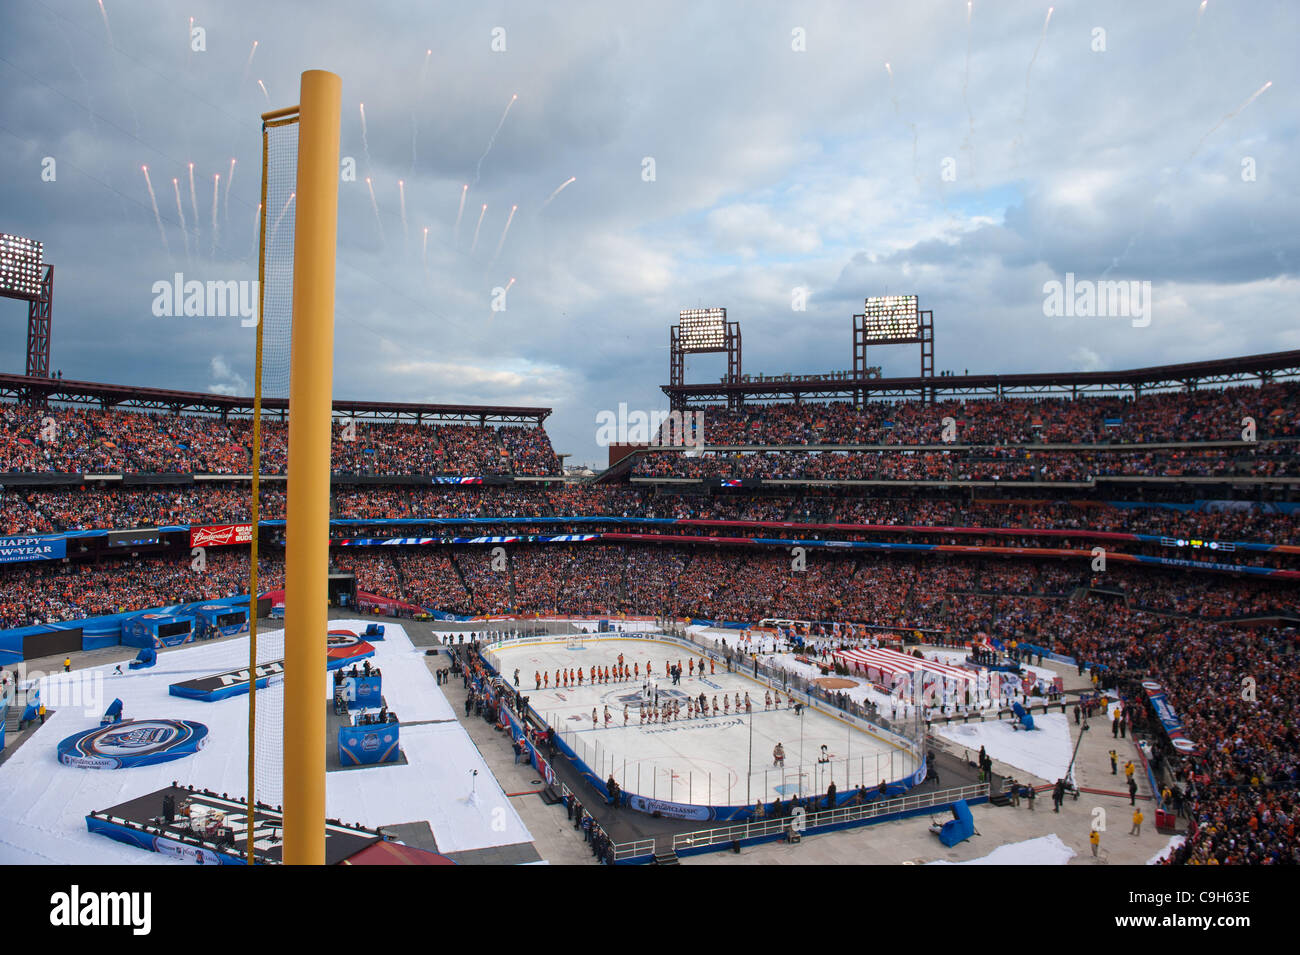 15 must-see images from the 2020 Winter Classic